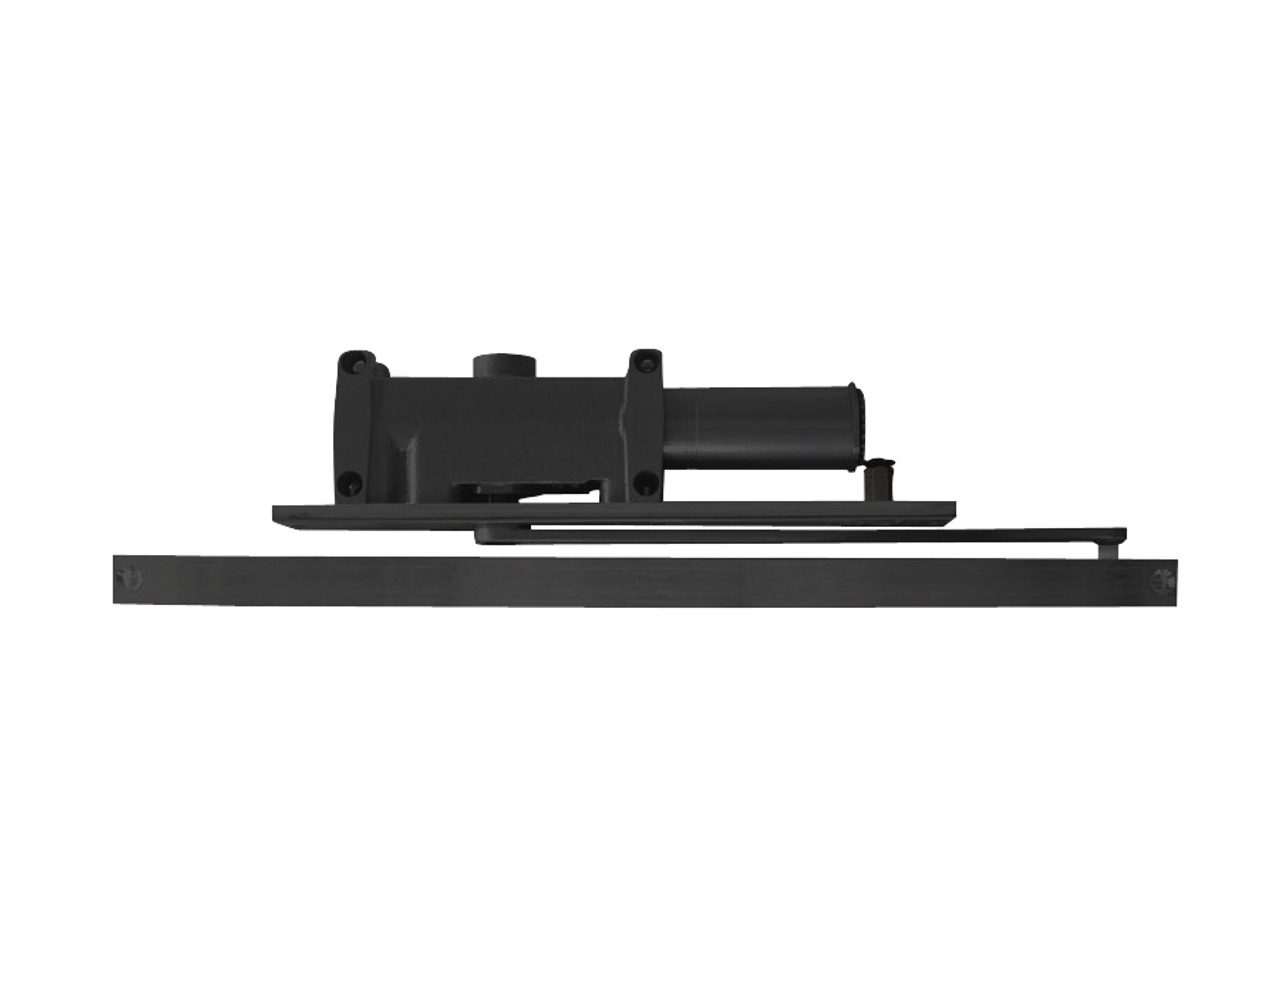 5011-H-RH-BLACK LCN Door Closer with Hold Open Arm in Black Finish